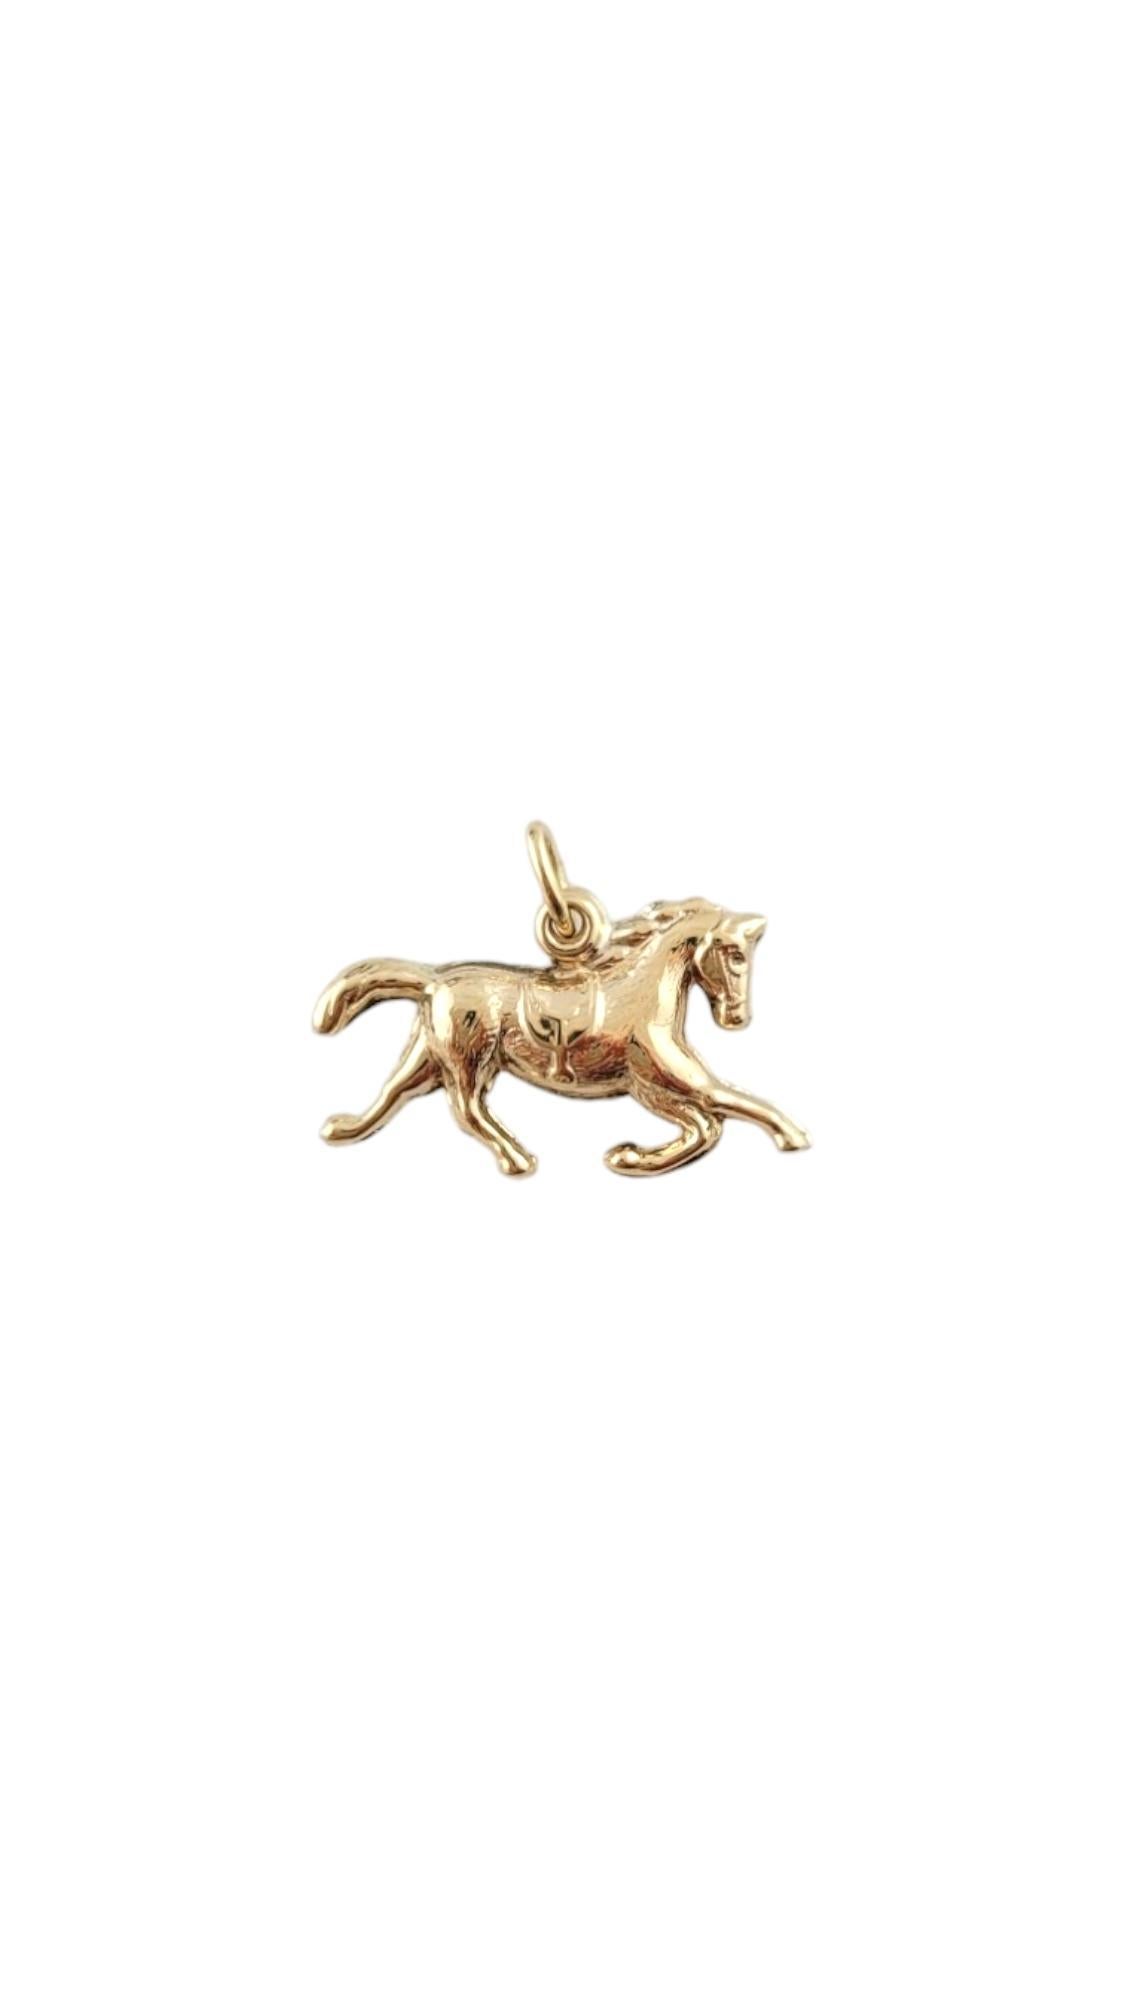 14 Karat Yellow Gold Horse Charm -

Show your equestrian side with this gorgeous horse charm, crafted in 14k yellow gold. 

Size: 19.8 mm x 11.7 mm x 3.3 mm. 

Stamped: 14K

Weight: 0.6 dwt./ 1.0 gr.

*Chain not included. 

Very good condition,